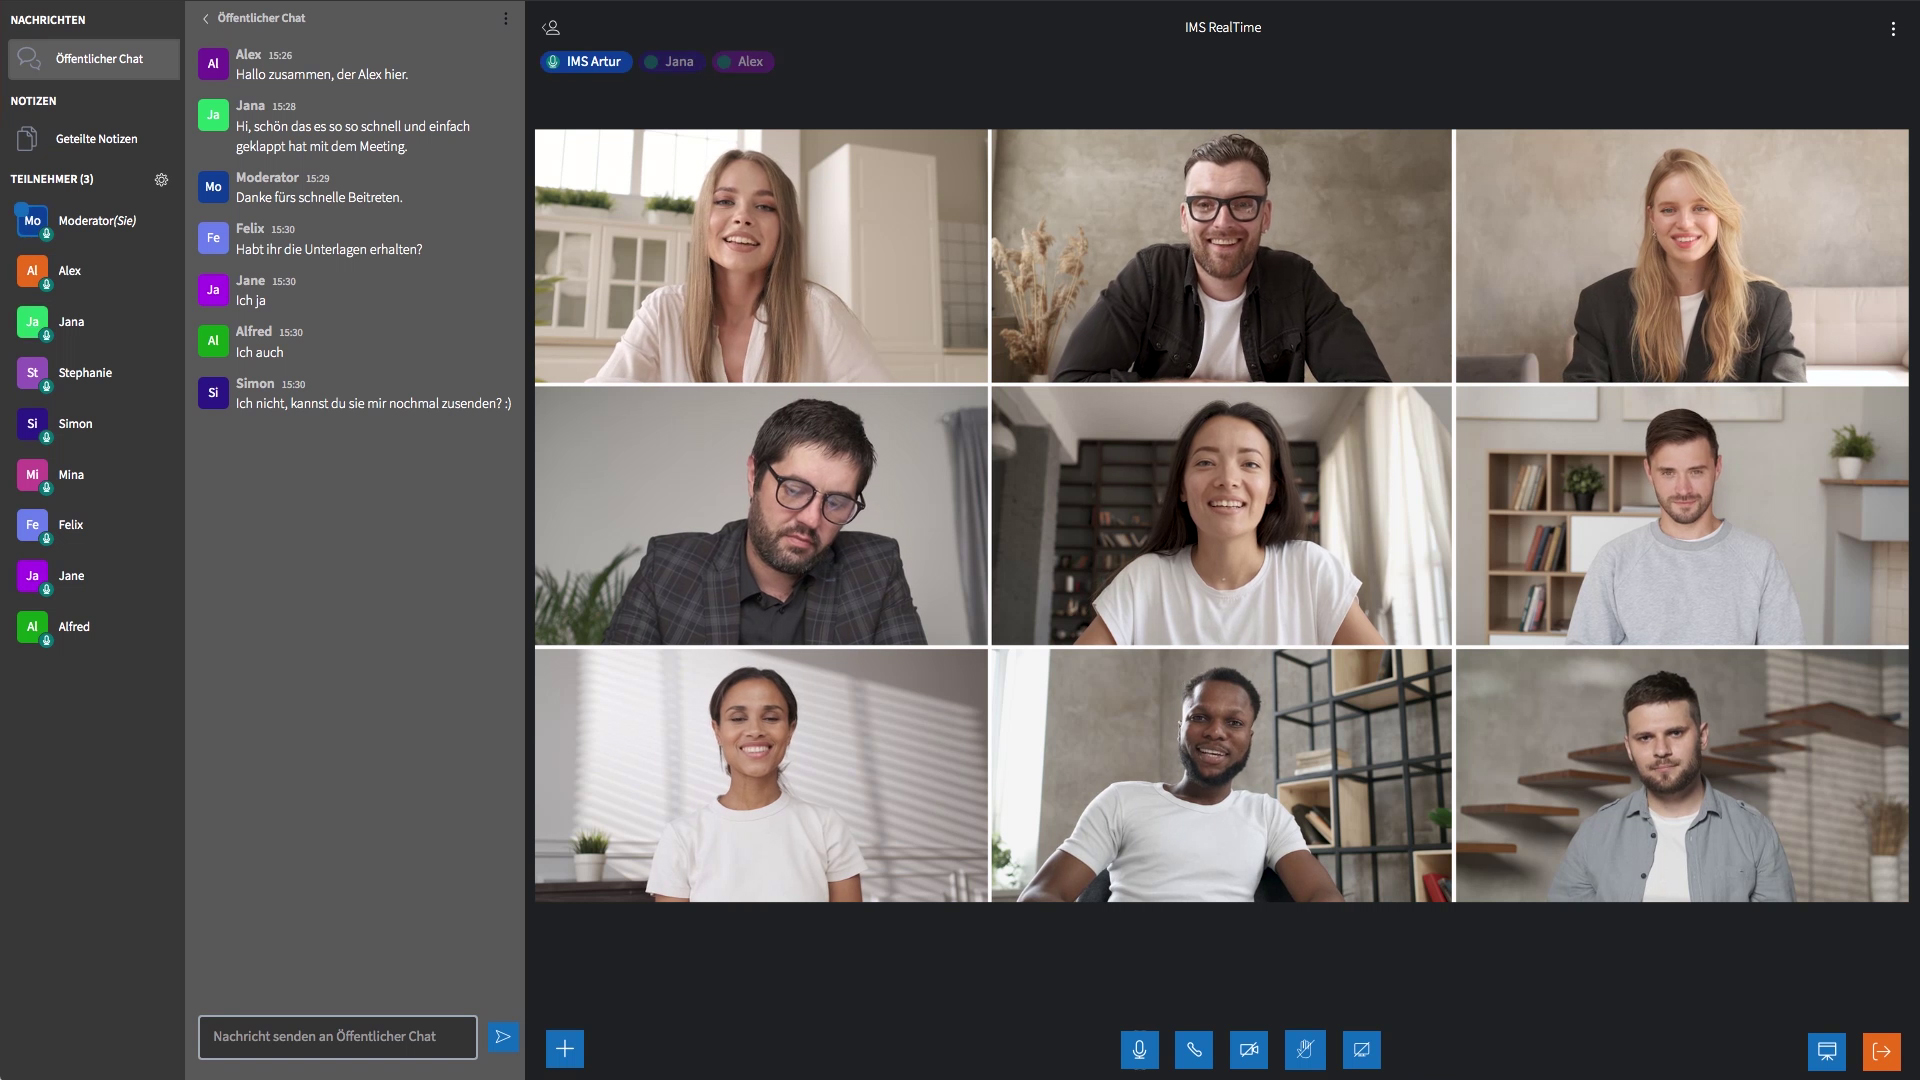 Customizable web conferencing tool